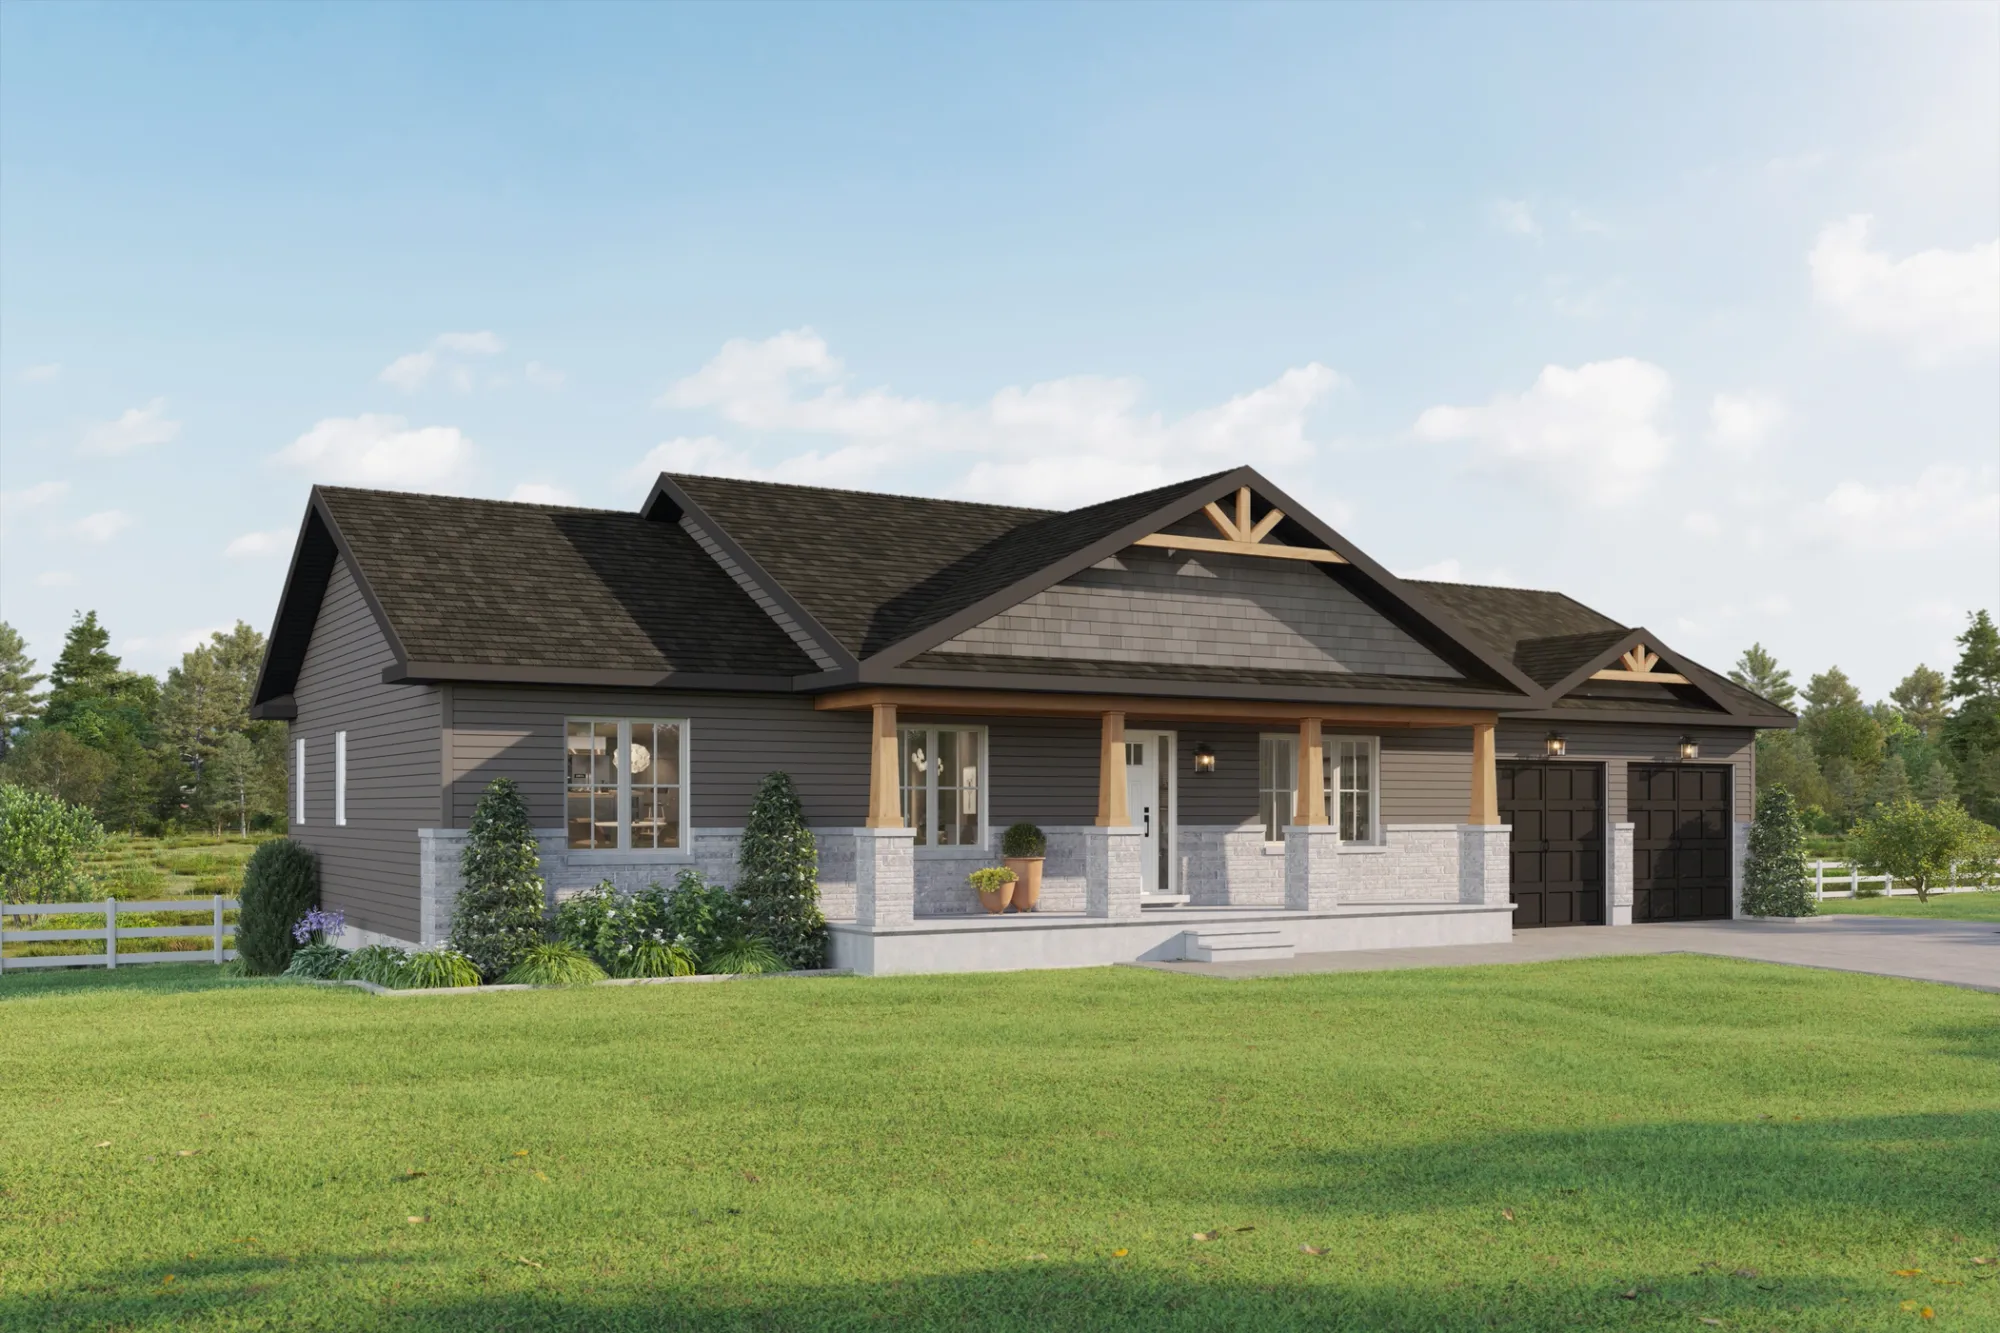 New bungalow for sale - Kenmore model at lot 49